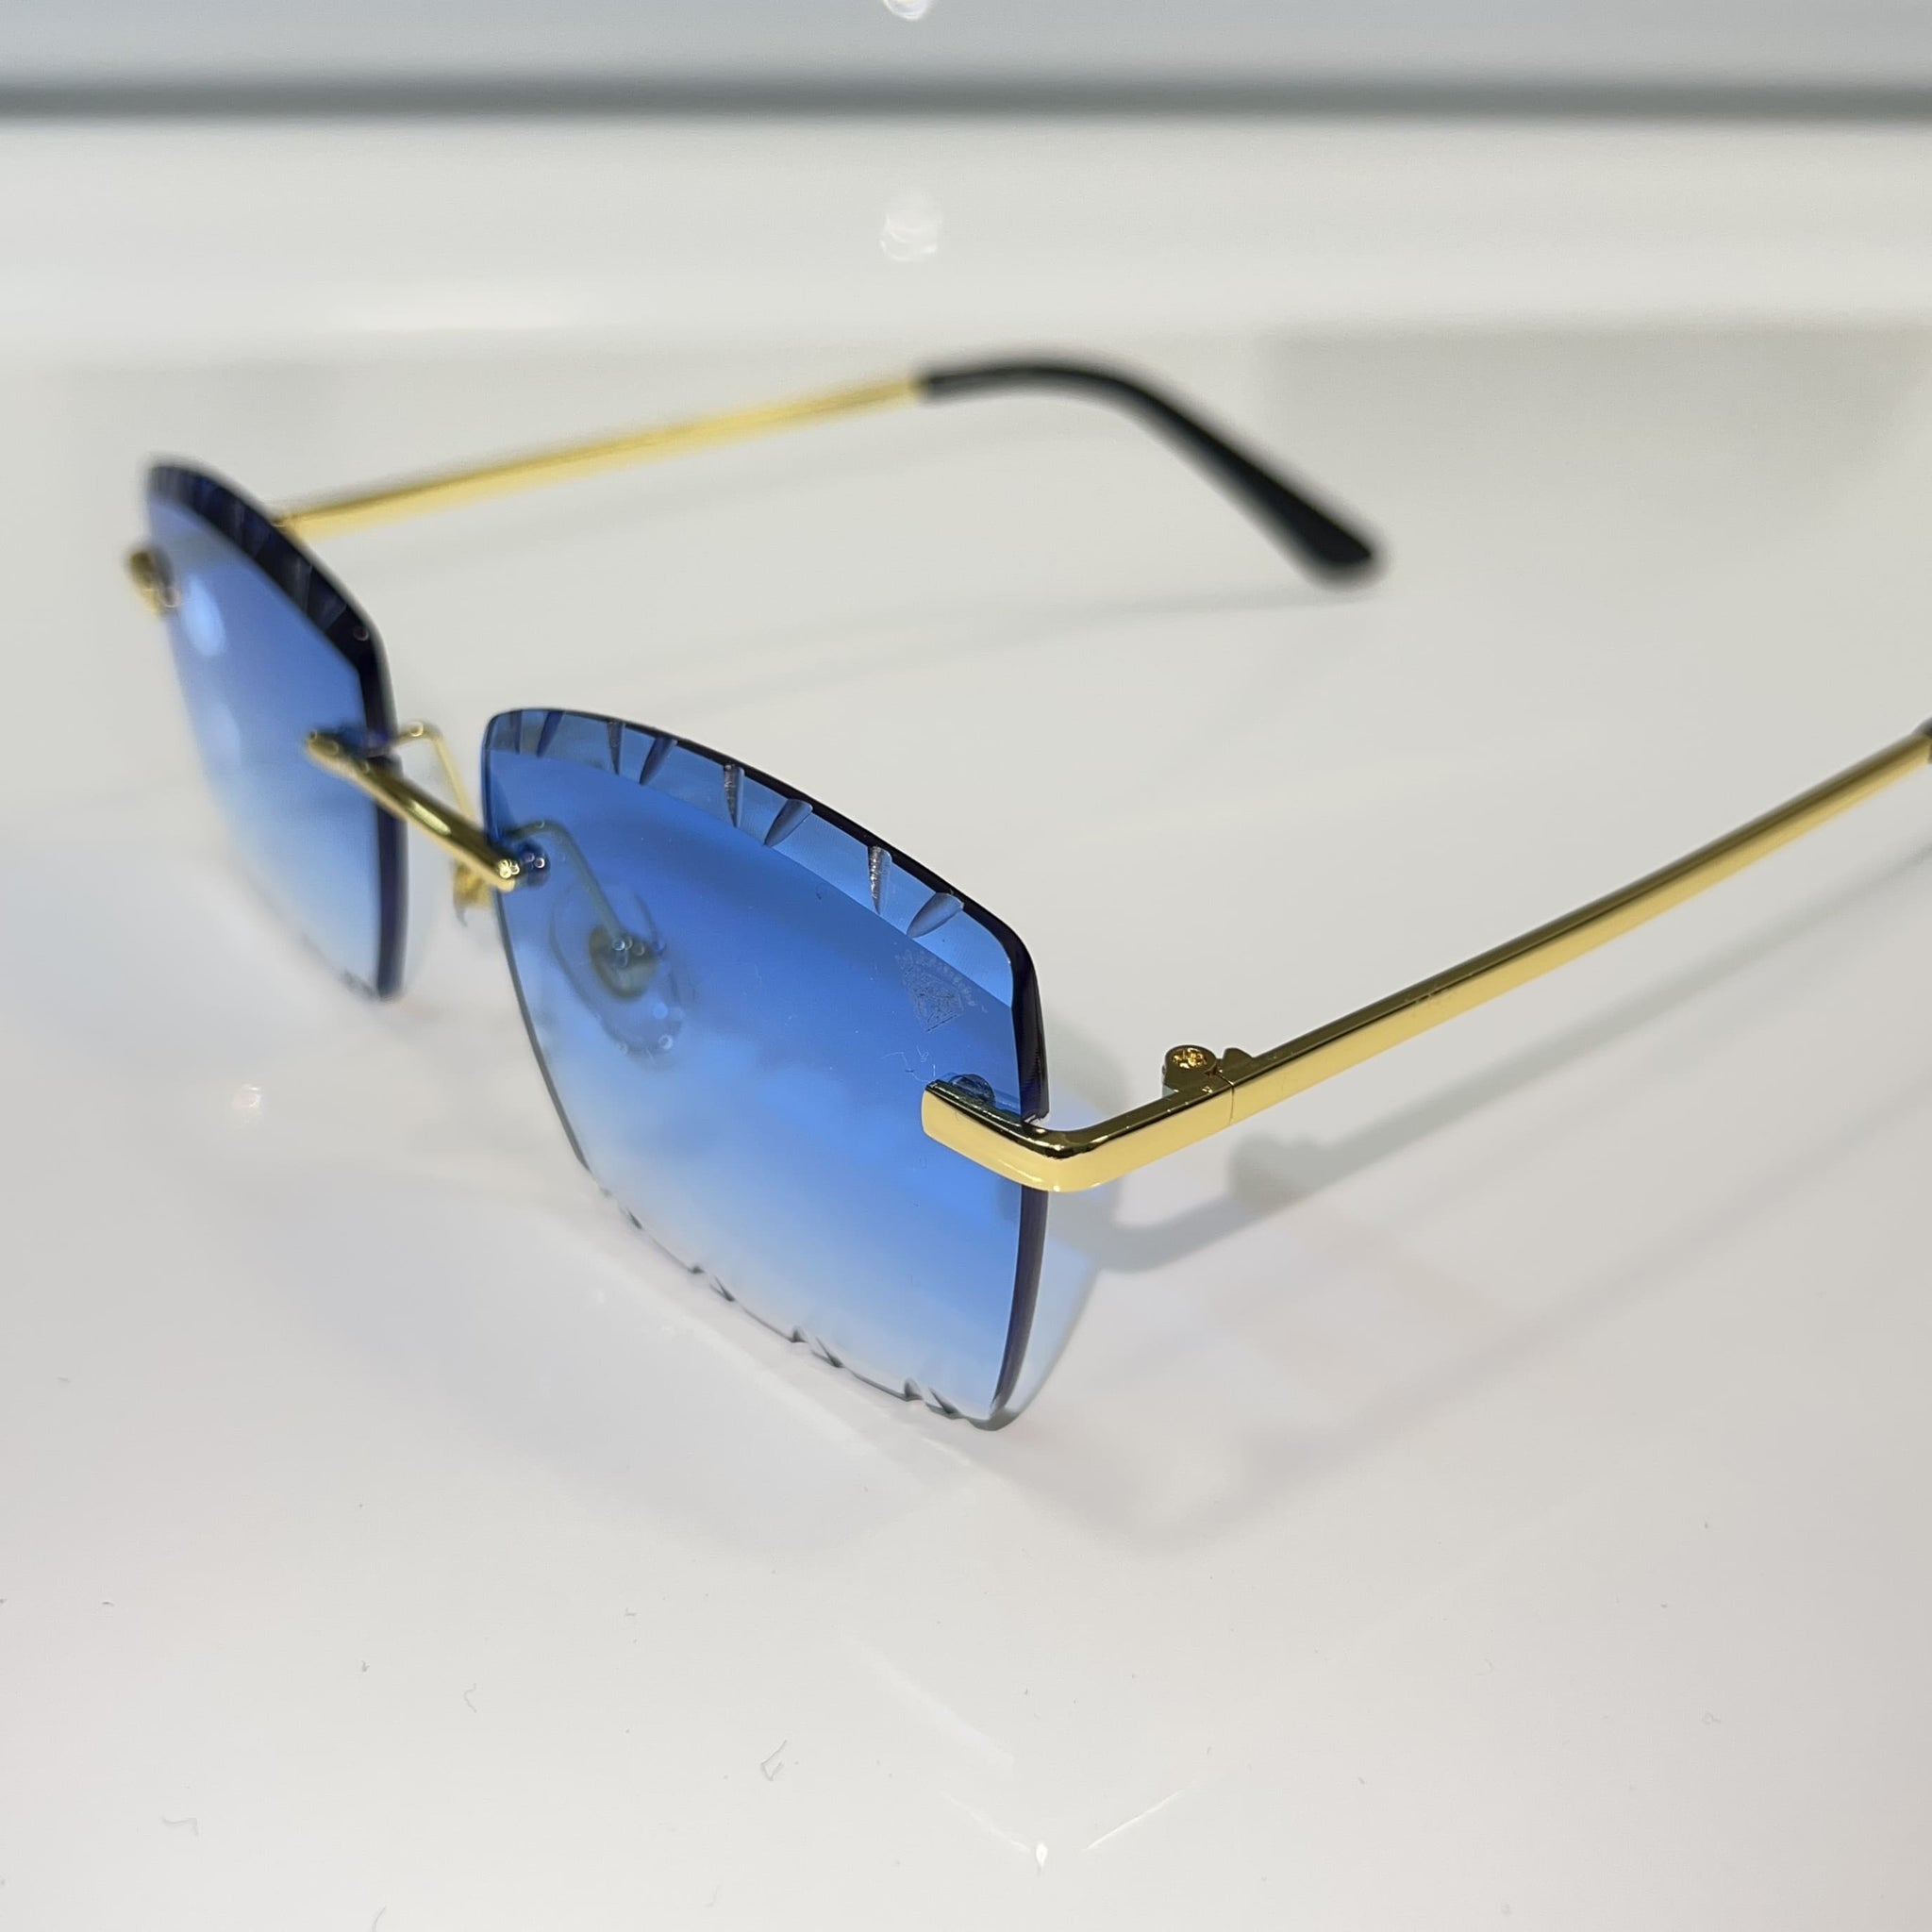 Dripcut Glasses - 14k gold plated - Blue Shade - Sehgal Glasses